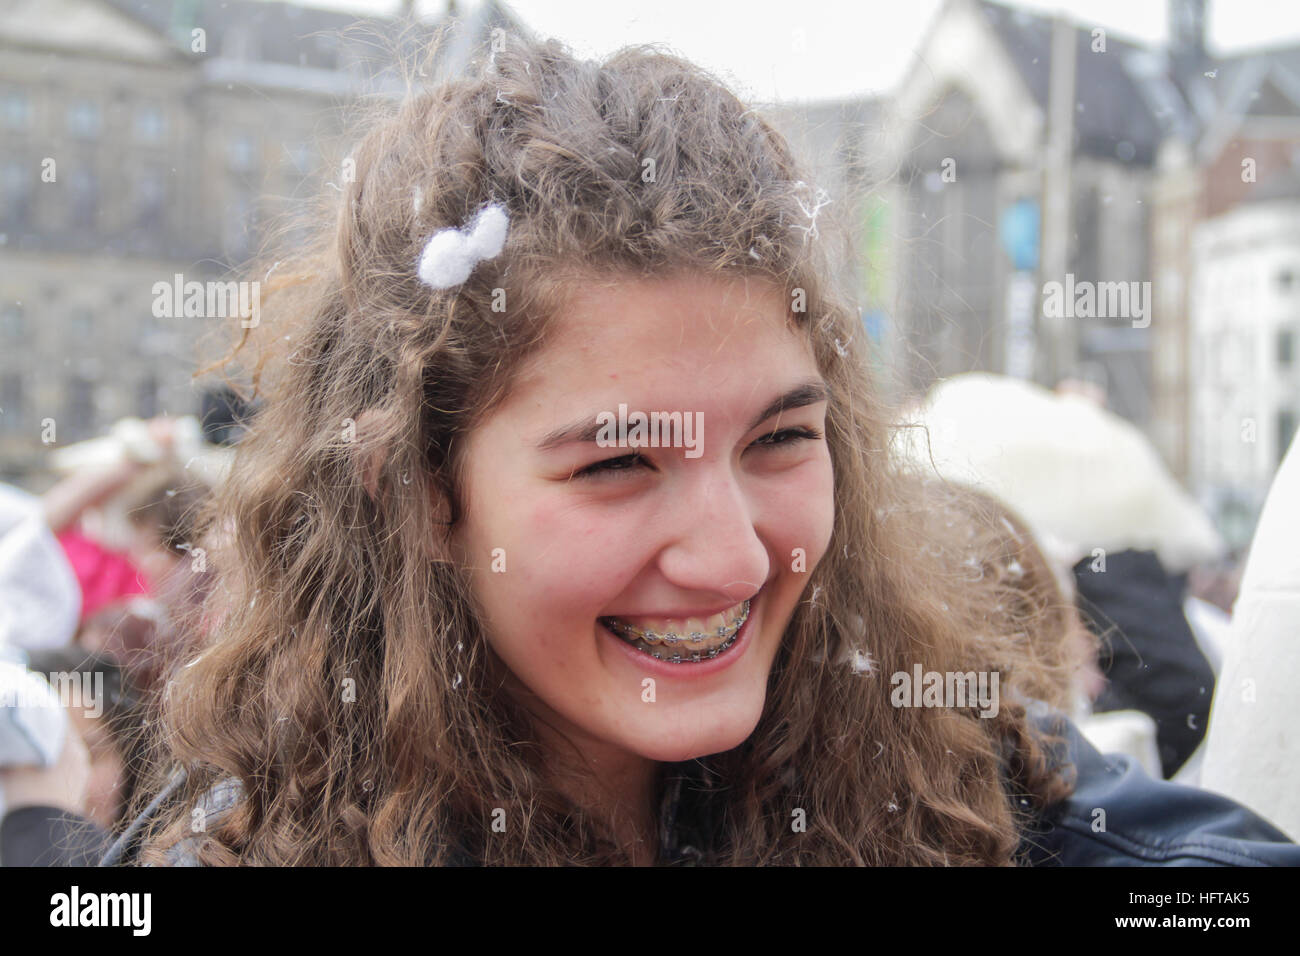 Smiling girl at the pillow fight event Stock Photo